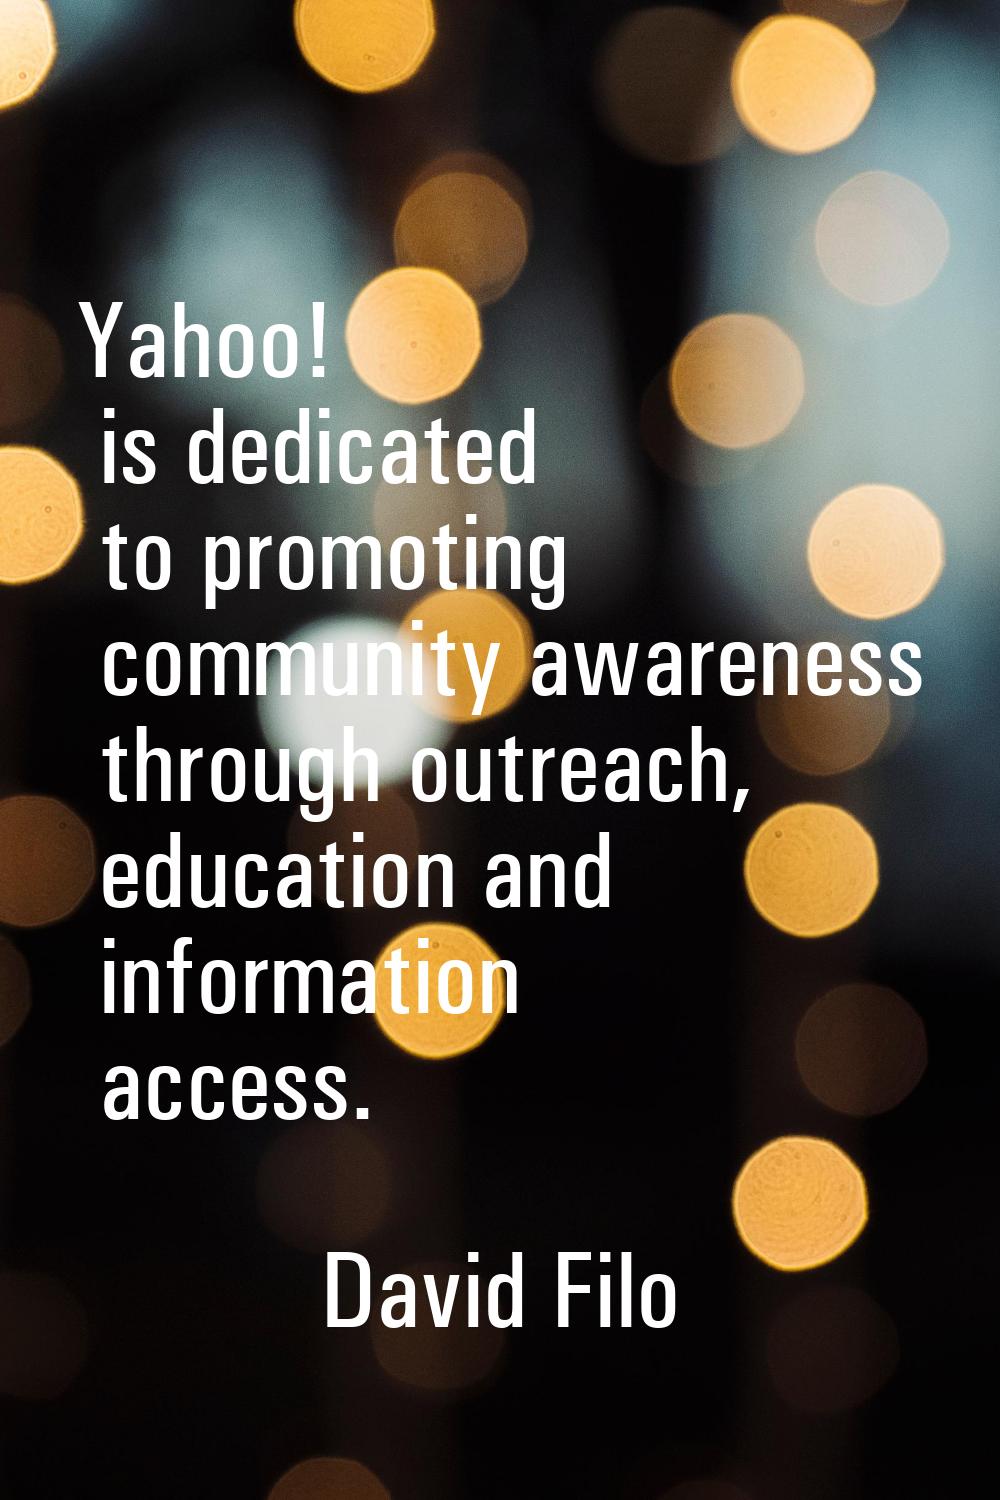 Yahoo! is dedicated to promoting community awareness through outreach, education and information ac